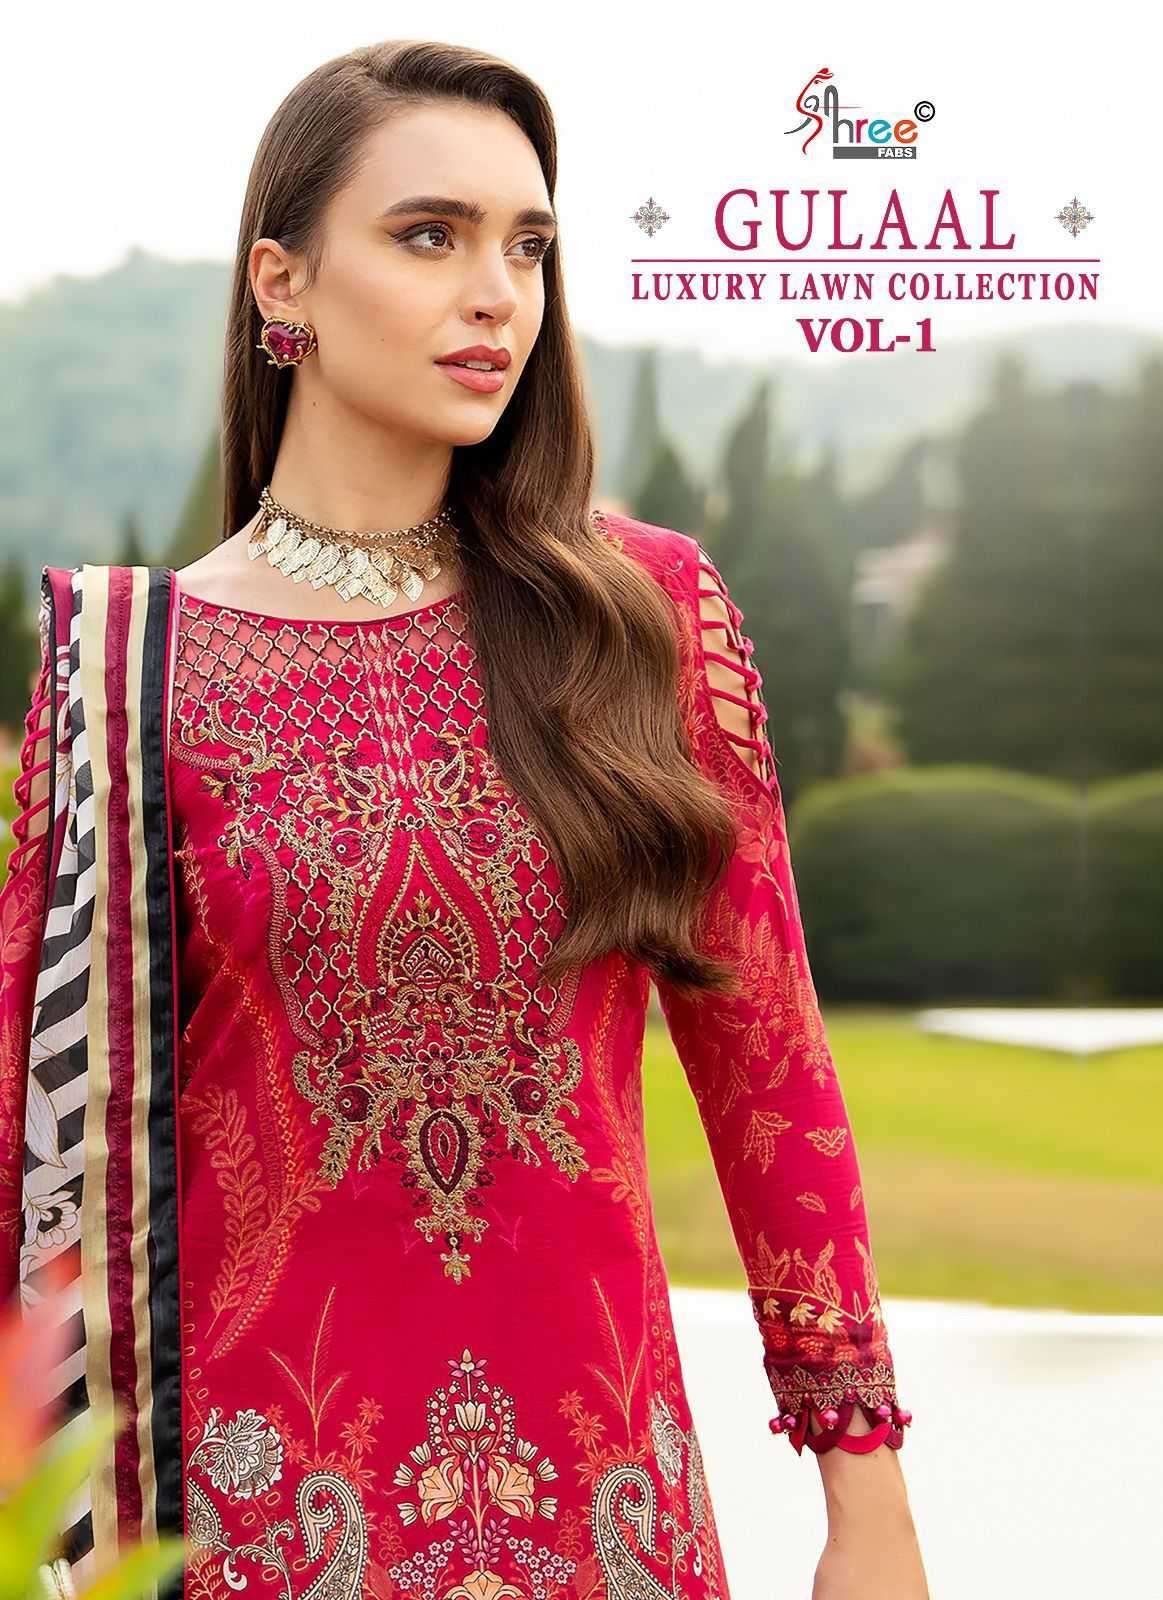 shree fabs gulaal luxury lawn collection vol 1 series 3557-3563 pure cotton suit 